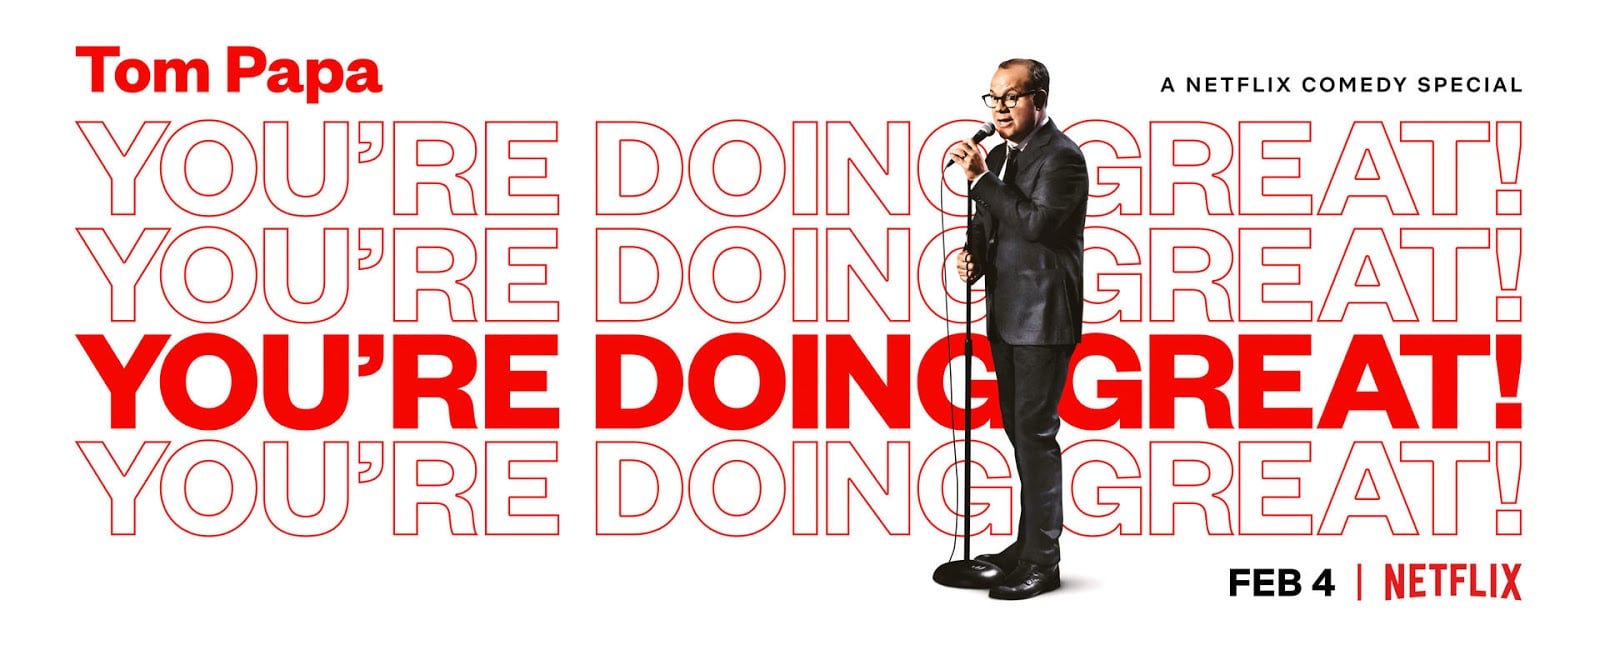 Netflix Stand-Up Comedy Special - Tom Papa Youre Doing Great! Trailer